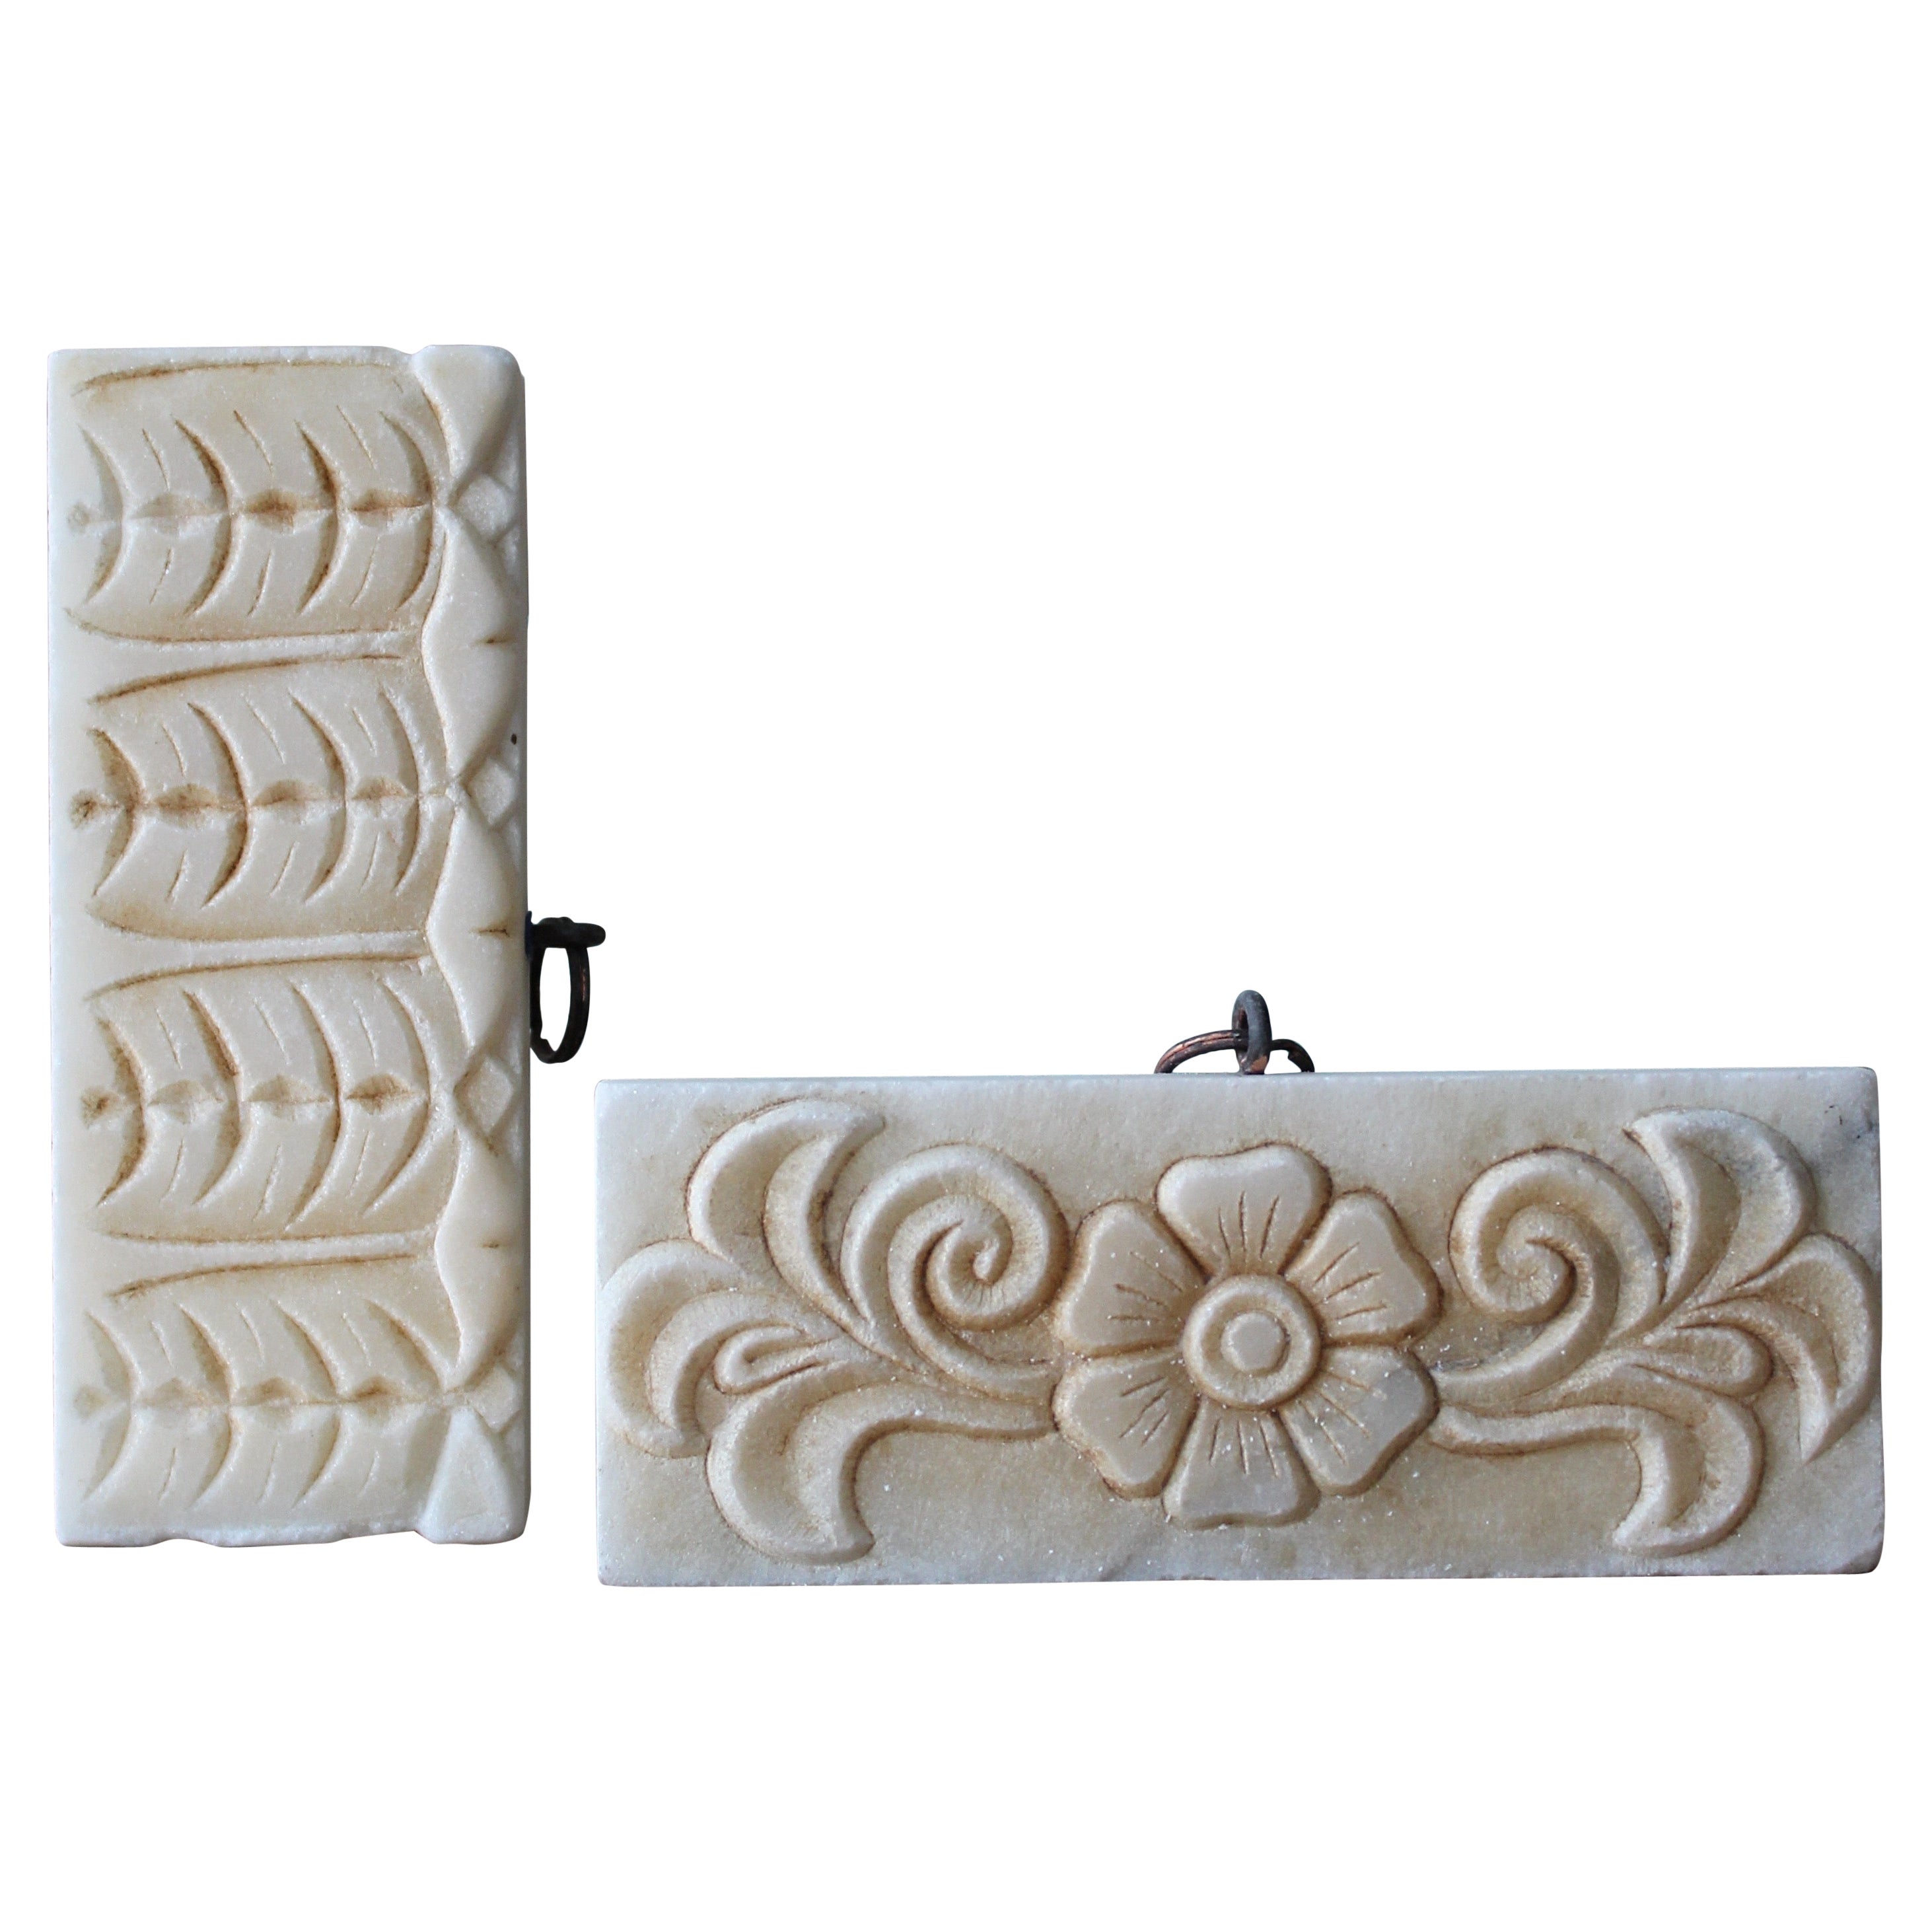 Early 20th Century Pair of Marble Architectural Decorative Elements For Sale